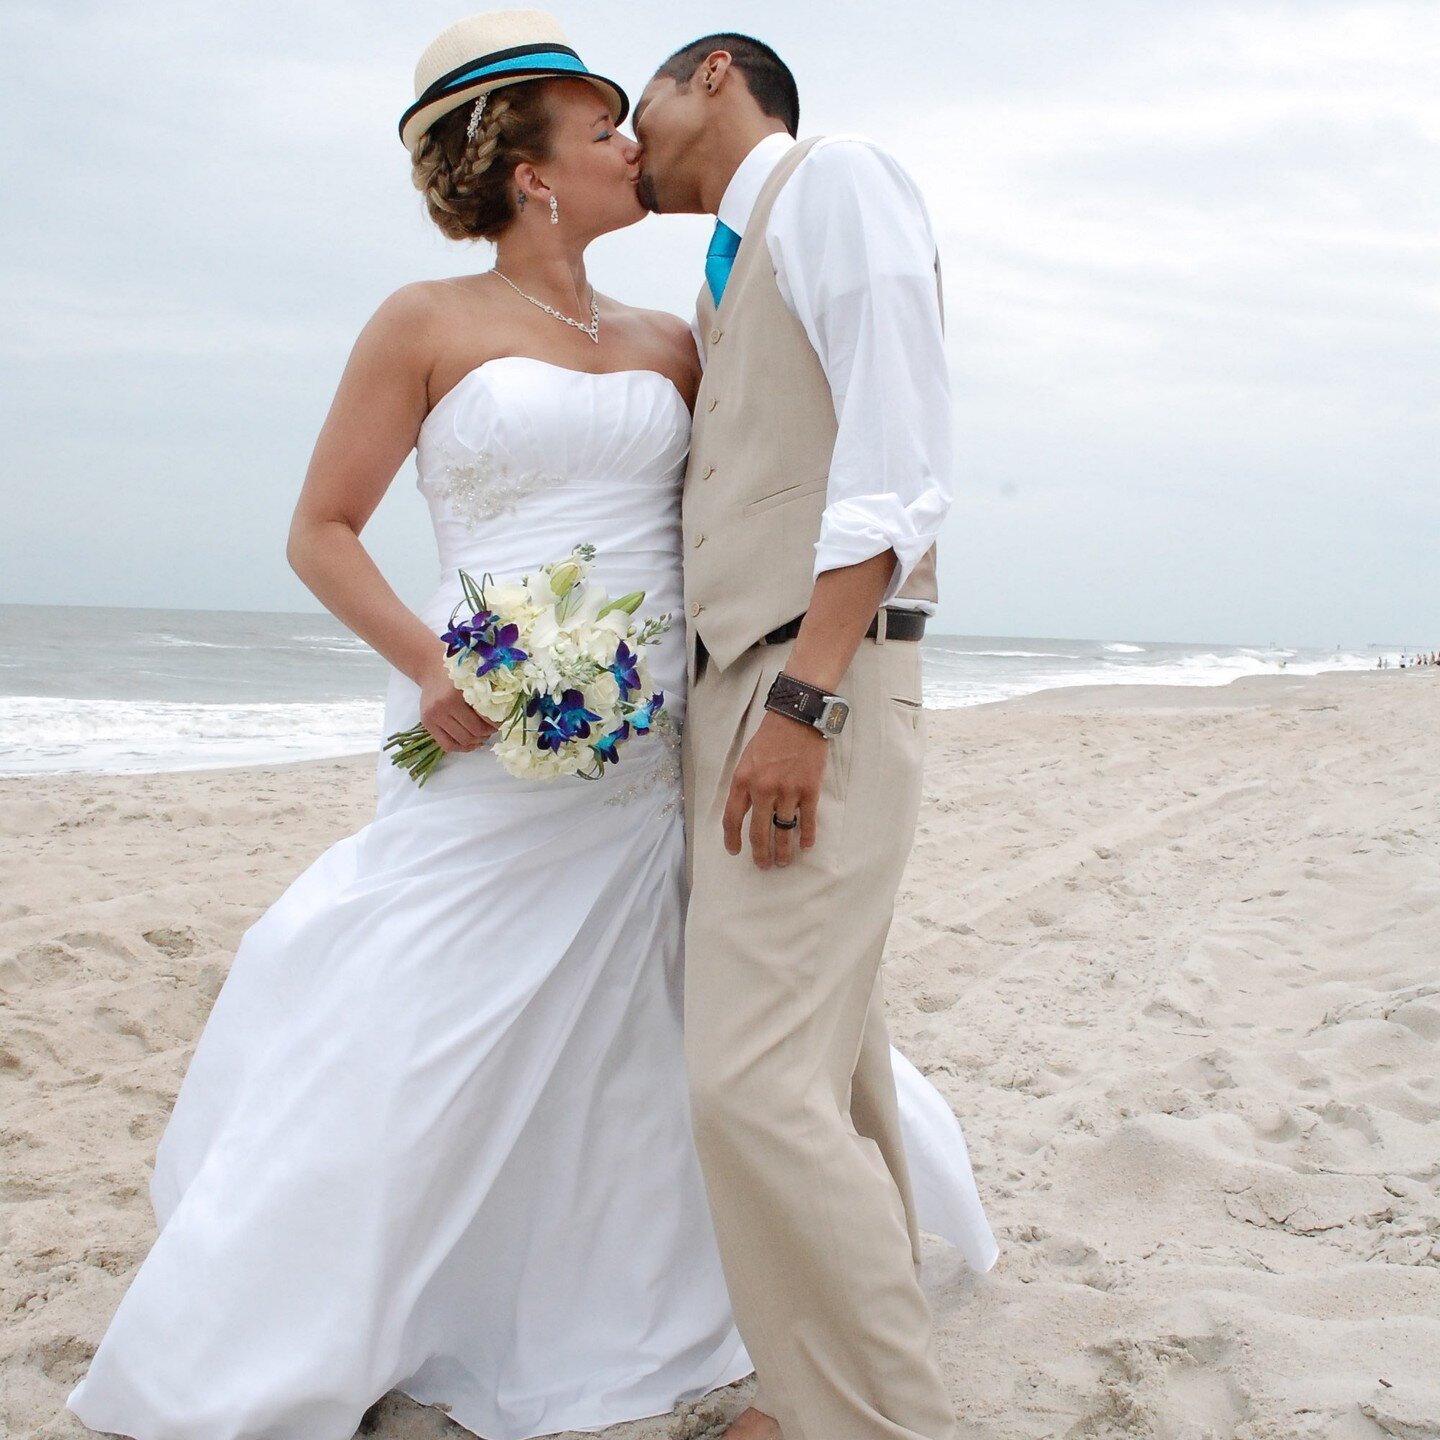 Couple on the beach, post-ceremony. From a wedding about 10 years ago. Loved this wedding. Ceremony and reception under the house with some romantic pics on the beach. Very informal and fun.

#beachweddings #beachweddingdress 
#carolinabeachwedding #